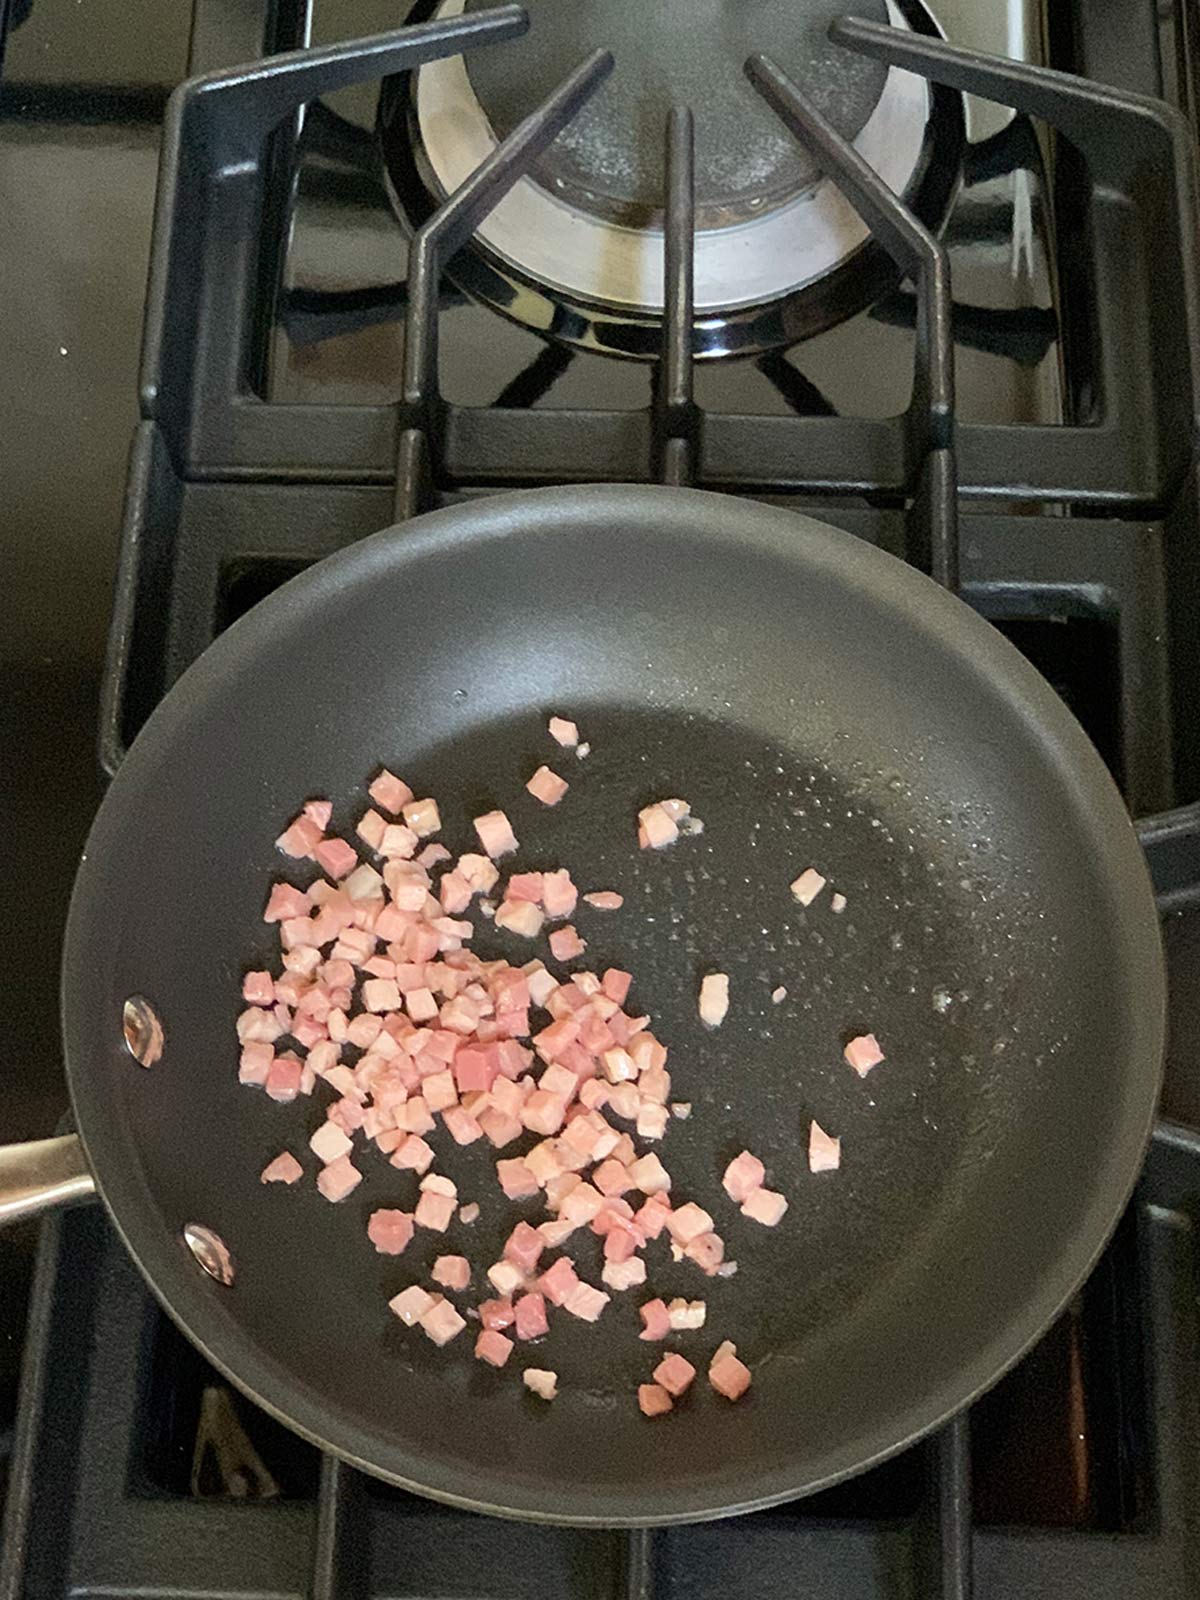 Pancetta cubes cooking in sauté pan on the stove.